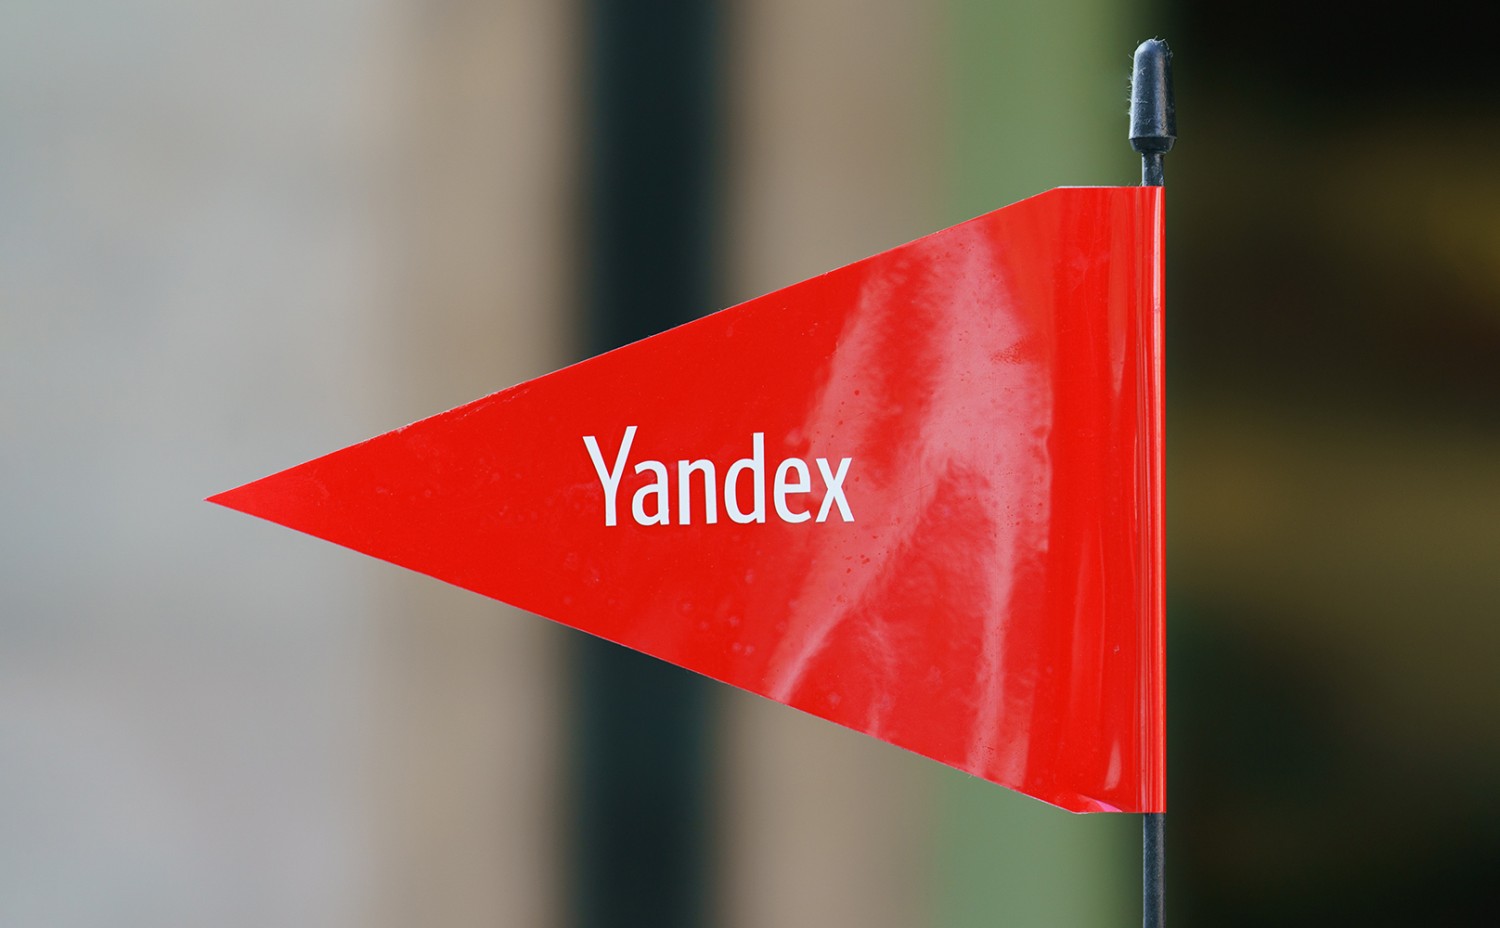 Yandex N.V. to Sell Its Russian Business for RUB 475 Billion